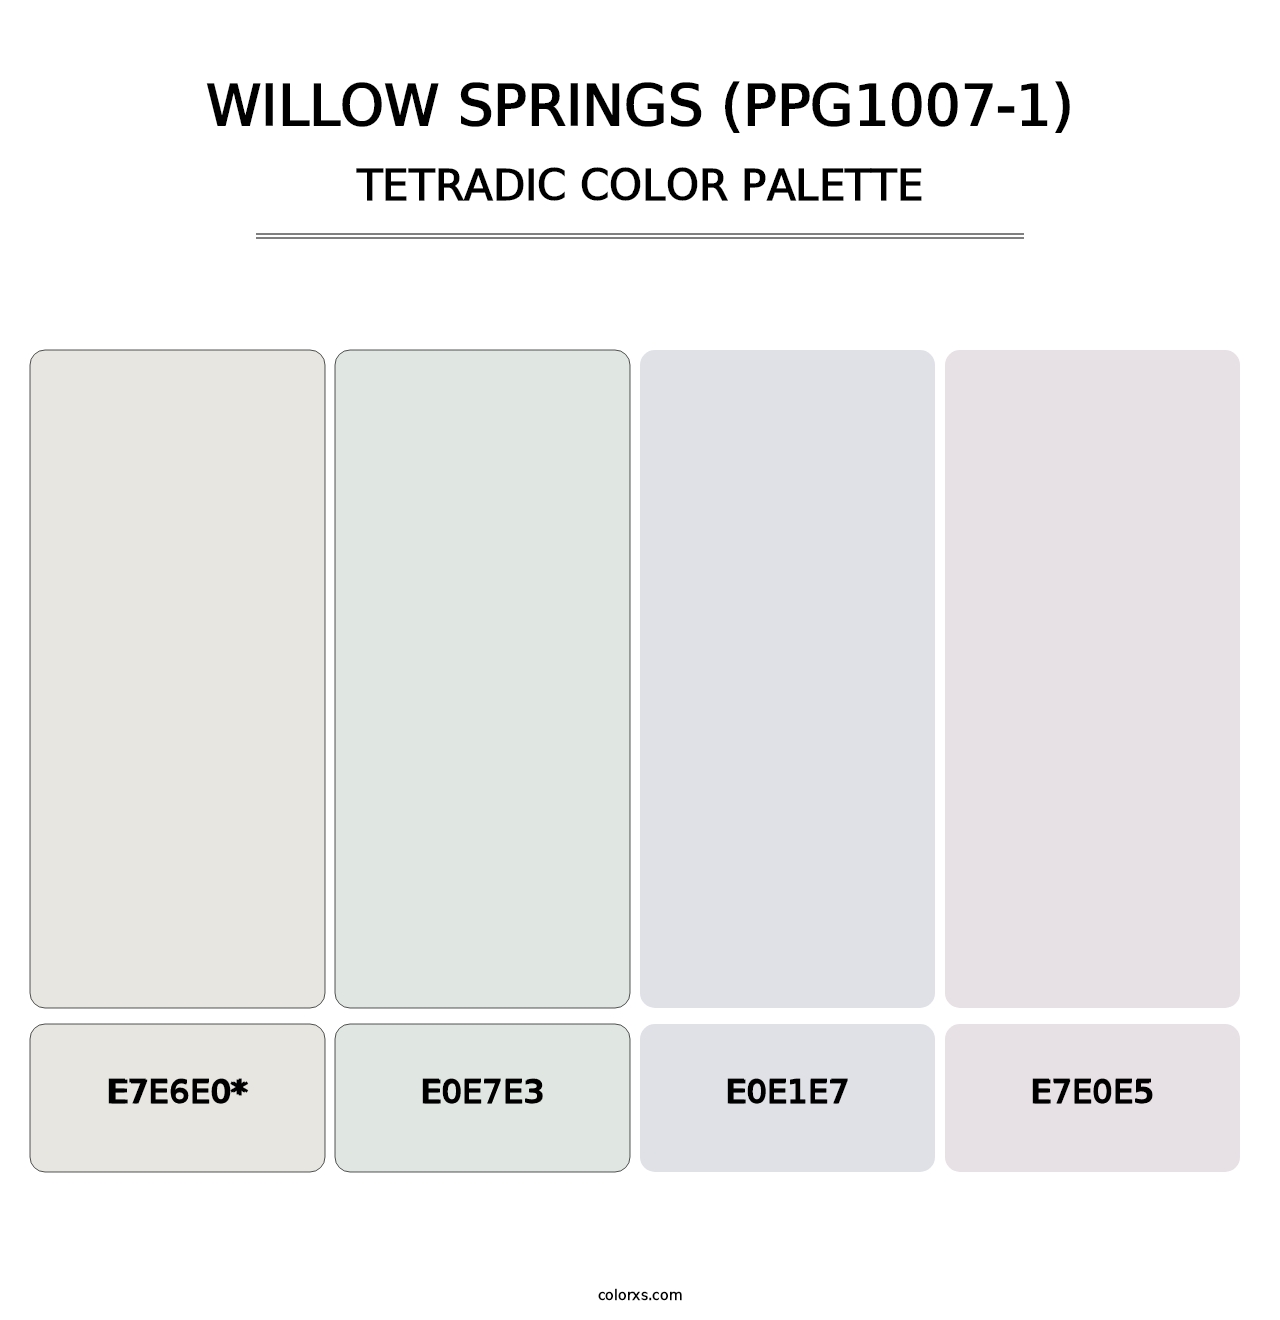 Willow Springs (PPG1007-1) - Tetradic Color Palette